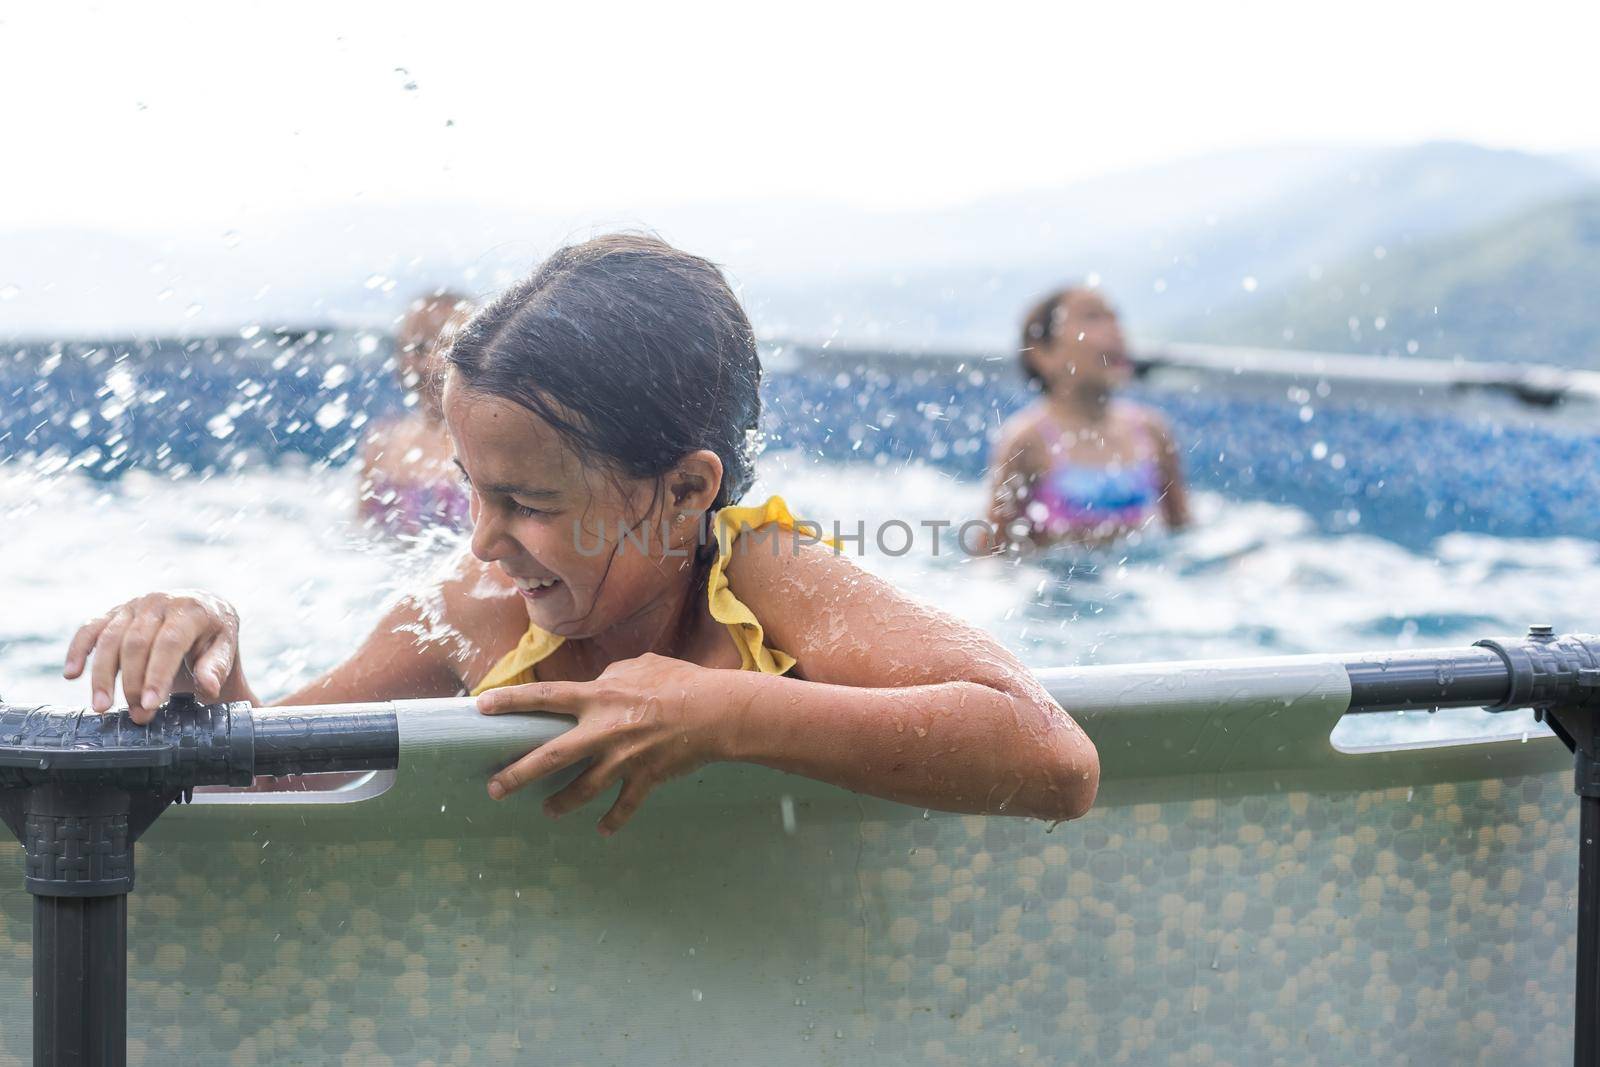 Smiling cute little caucasian girl in outdoor pool in sunny day. The girl is holding on to the side of the pool. Summer, vacation and health care concept. Space for text.